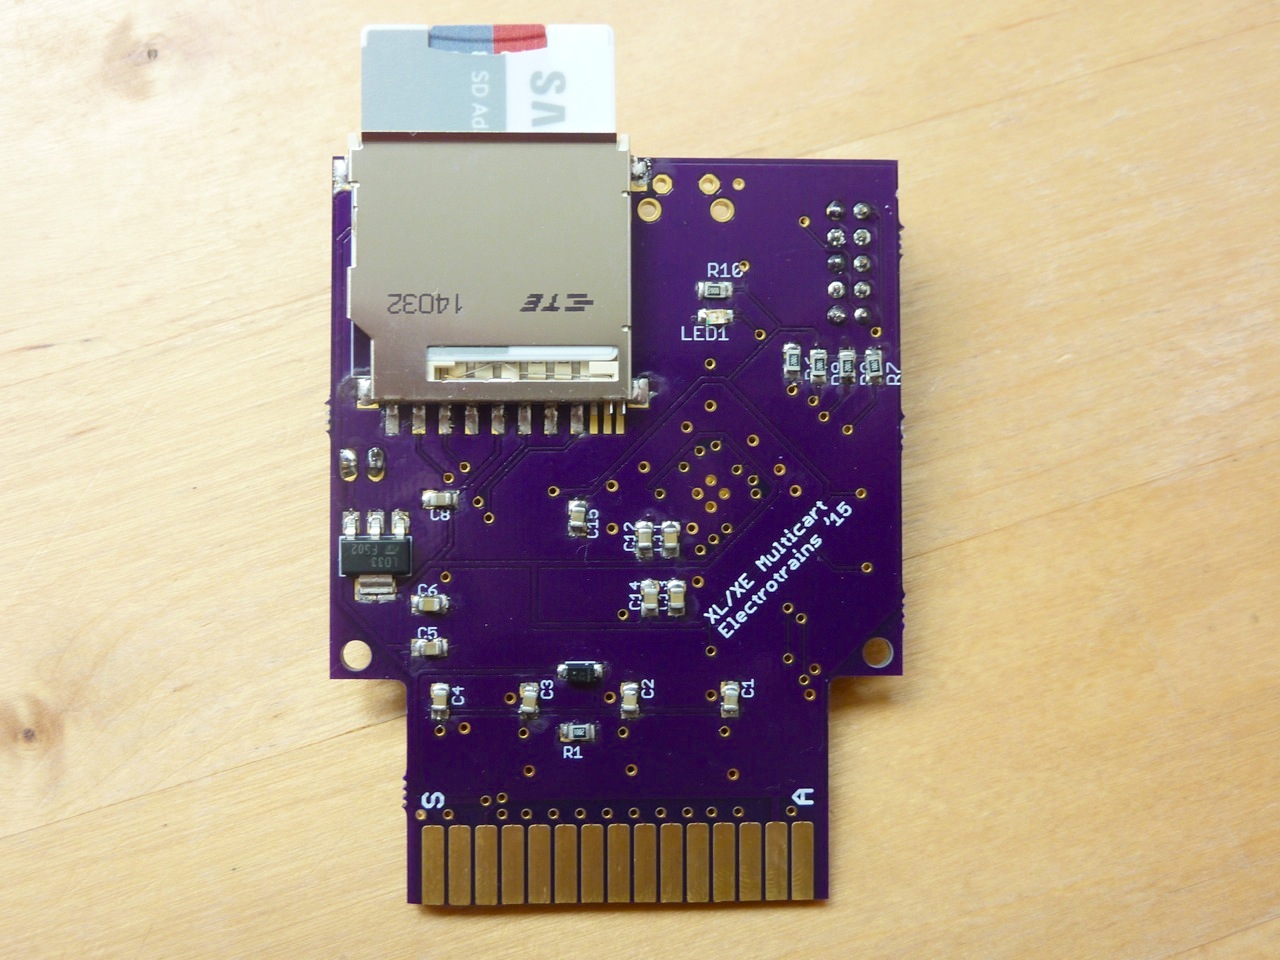 Top/Front of PCB when inserted in Atari